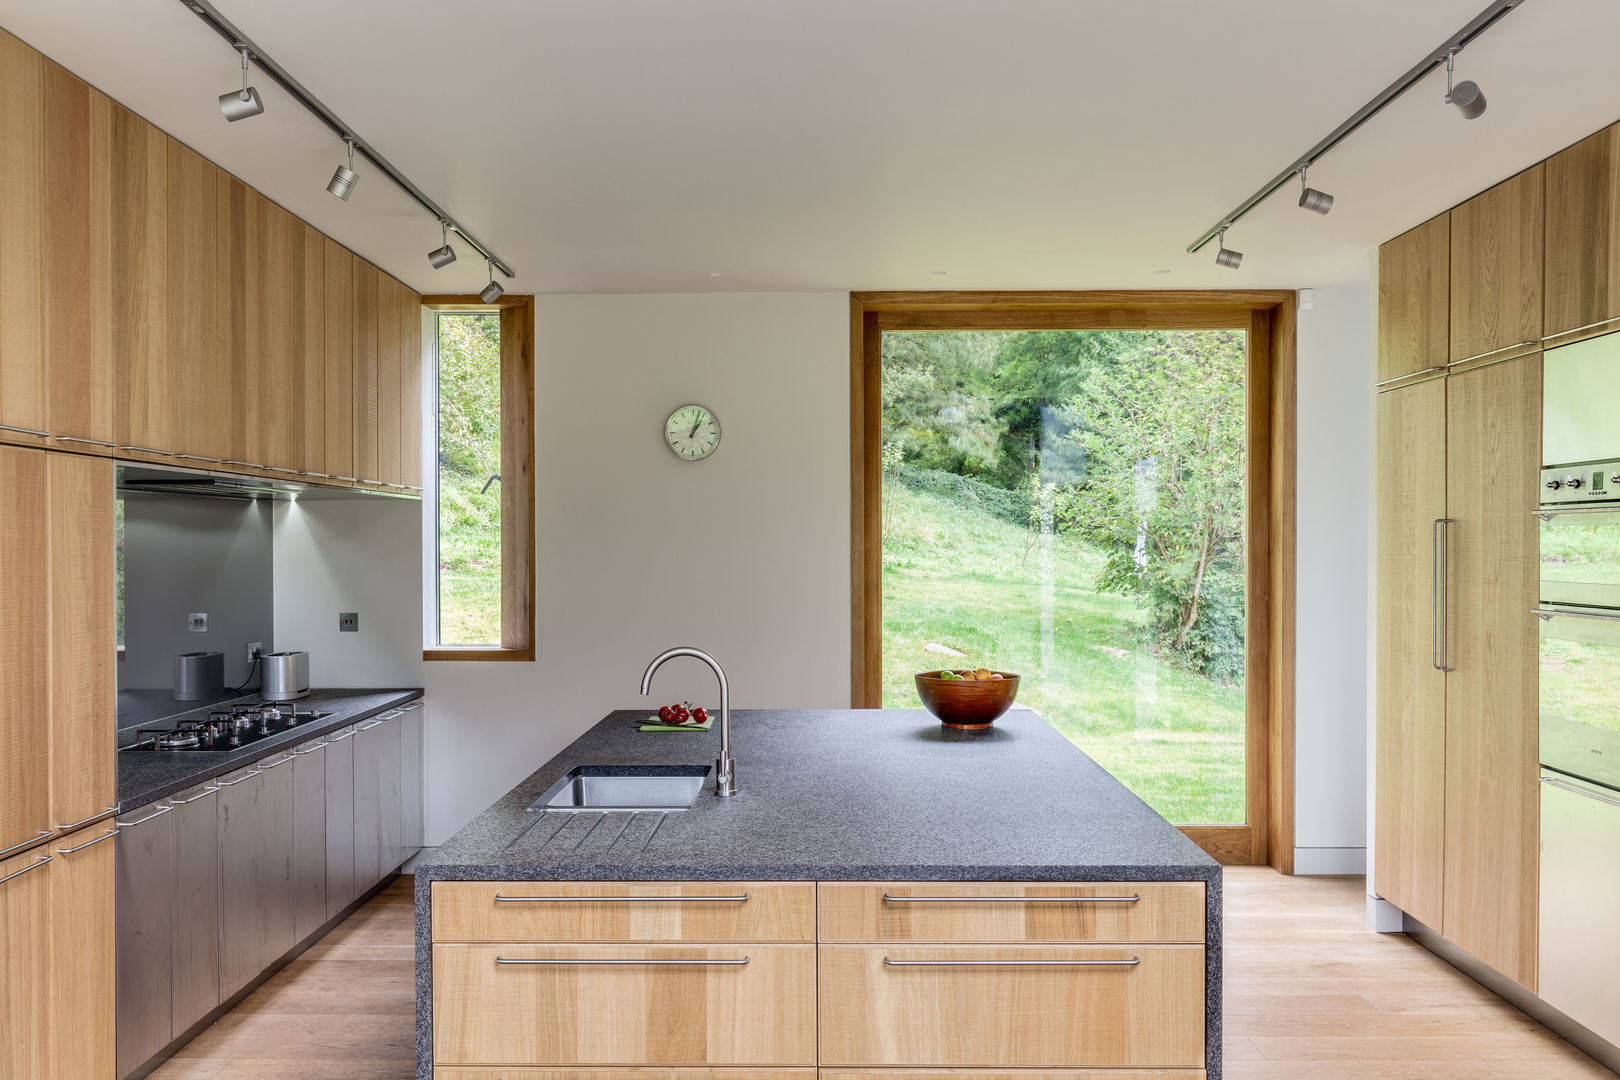 The Nook, Hall + Bednarczyk Architects Hall + Bednarczyk Architects Kitchen